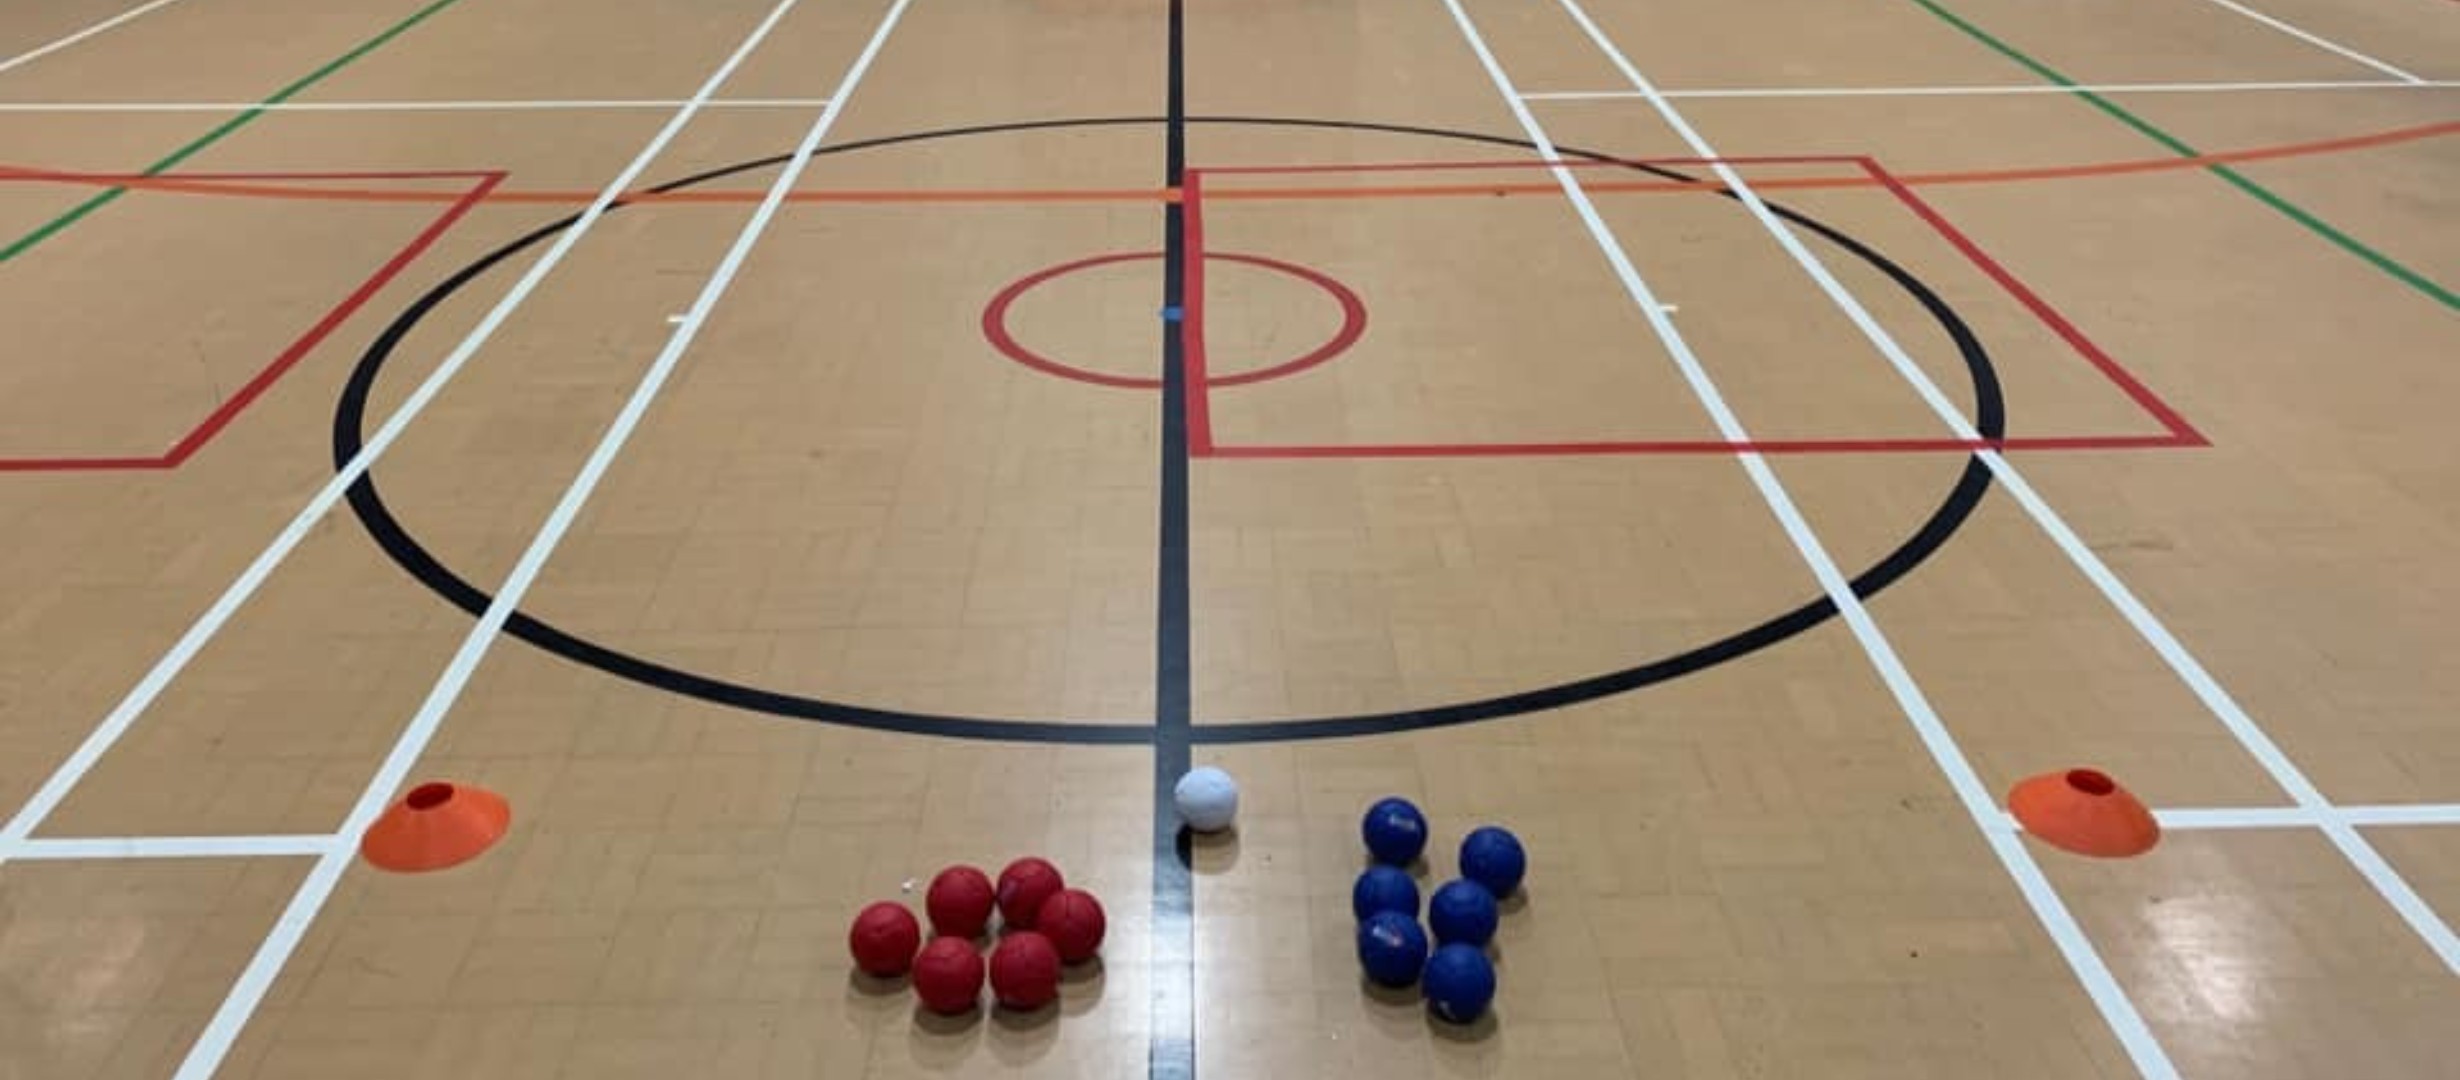 photo of sports hall floor with boccia balls and cones